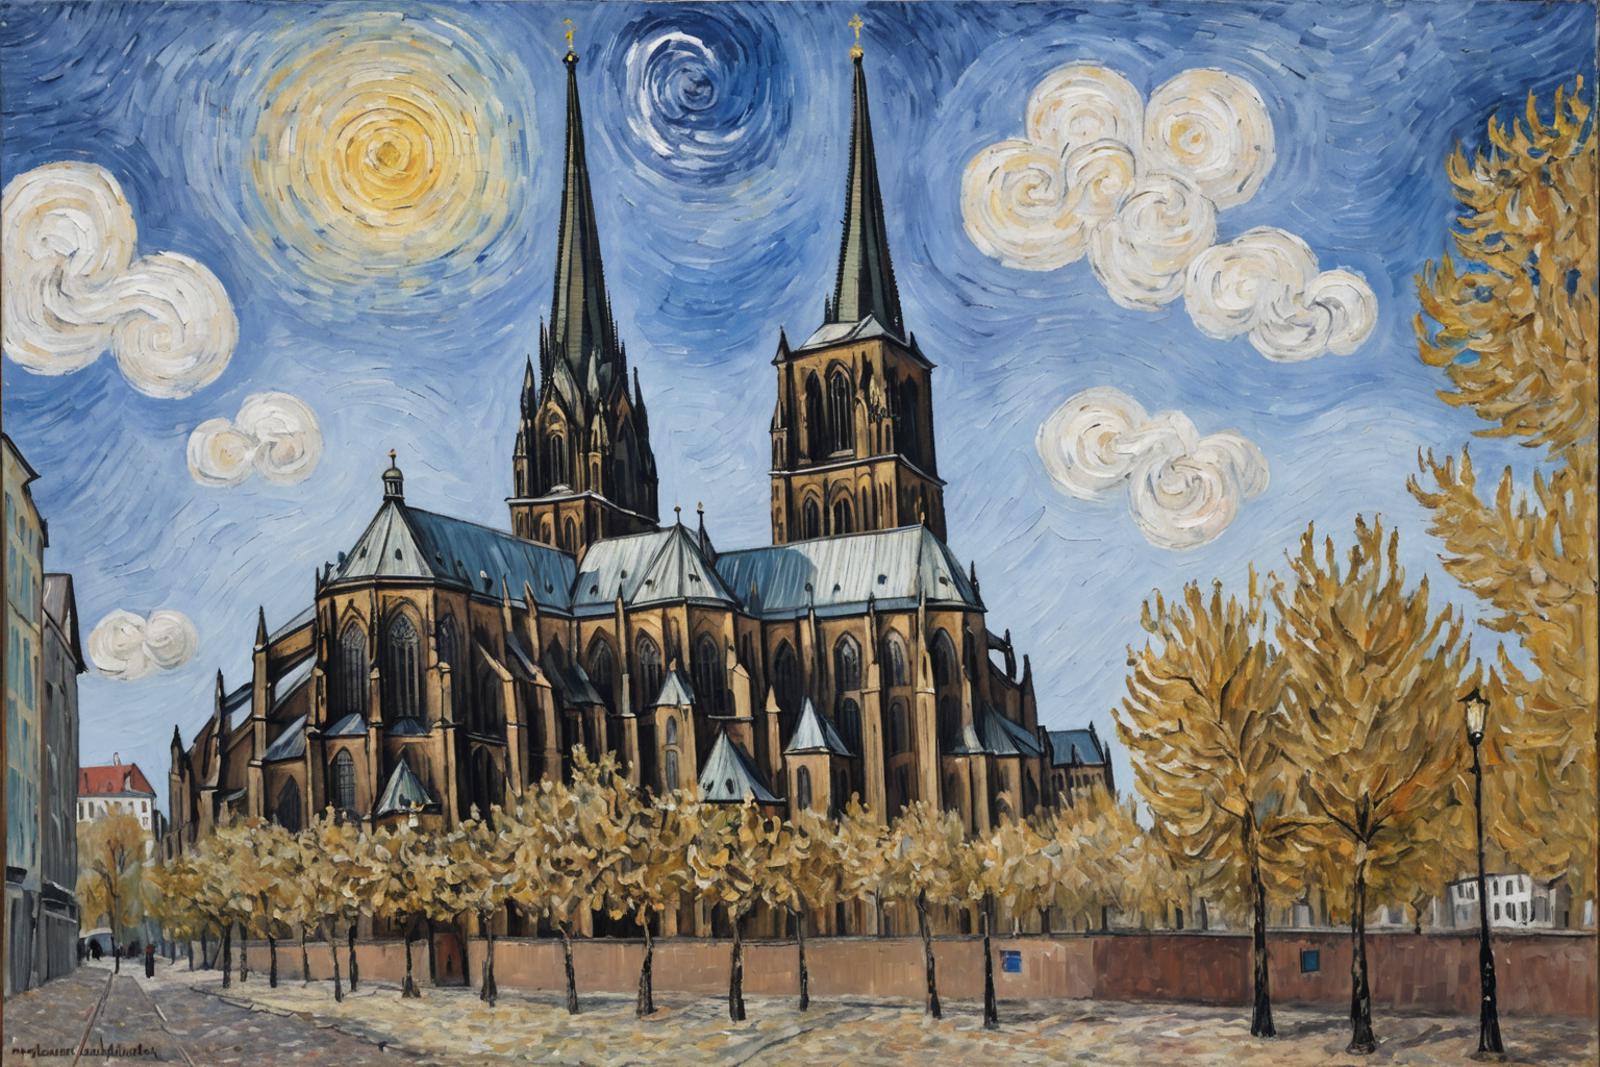 A Painting of a Cathedral with Towers and Cloudy Skies